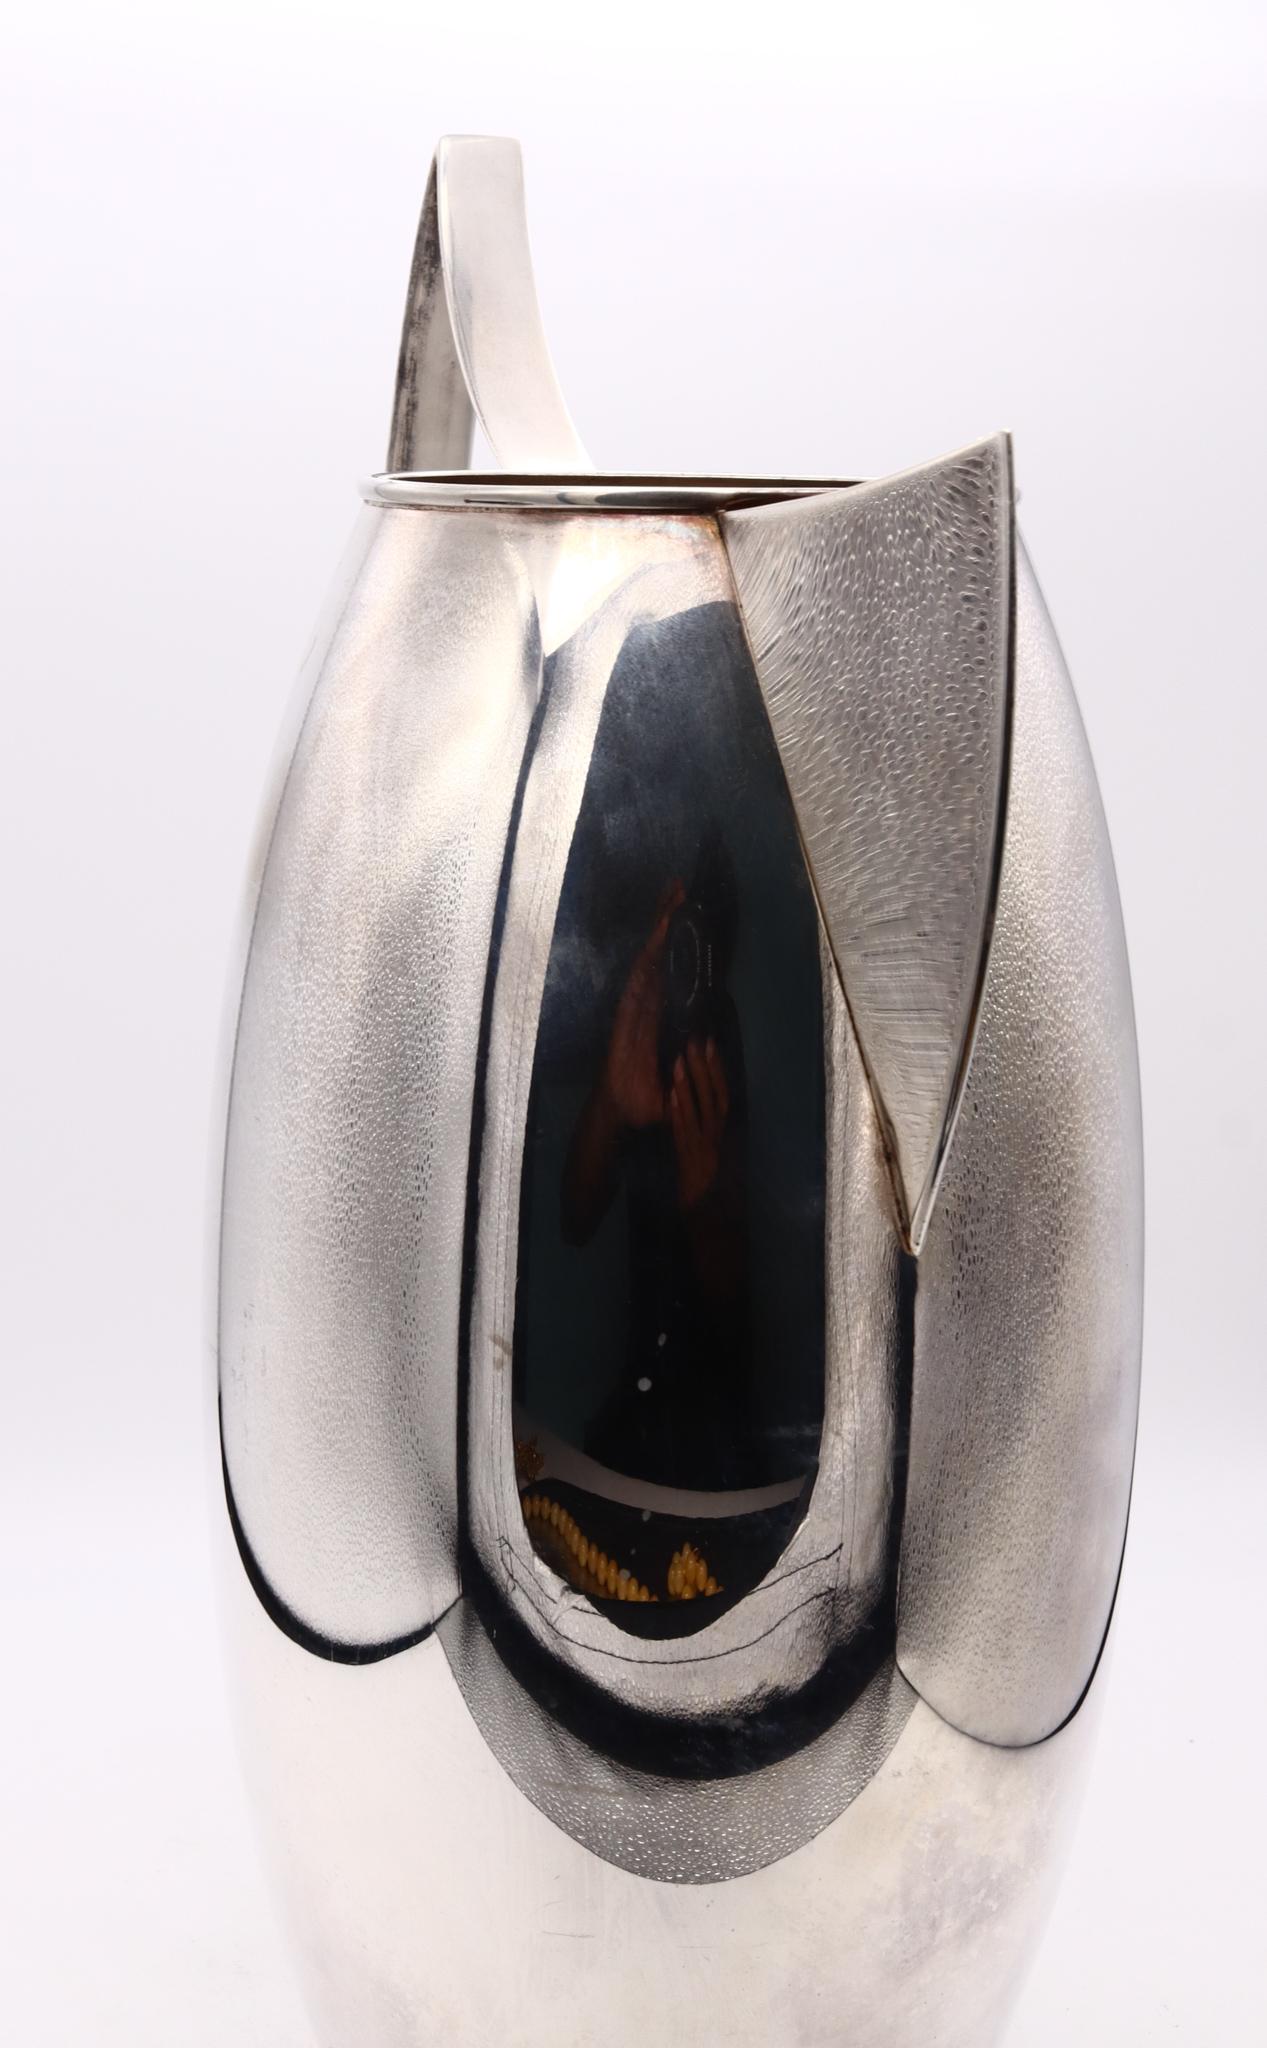 Cleto Munari 1985 Milano Architectural Water Pitcher Jar in Solid .925 Sterling In Excellent Condition For Sale In Miami, FL